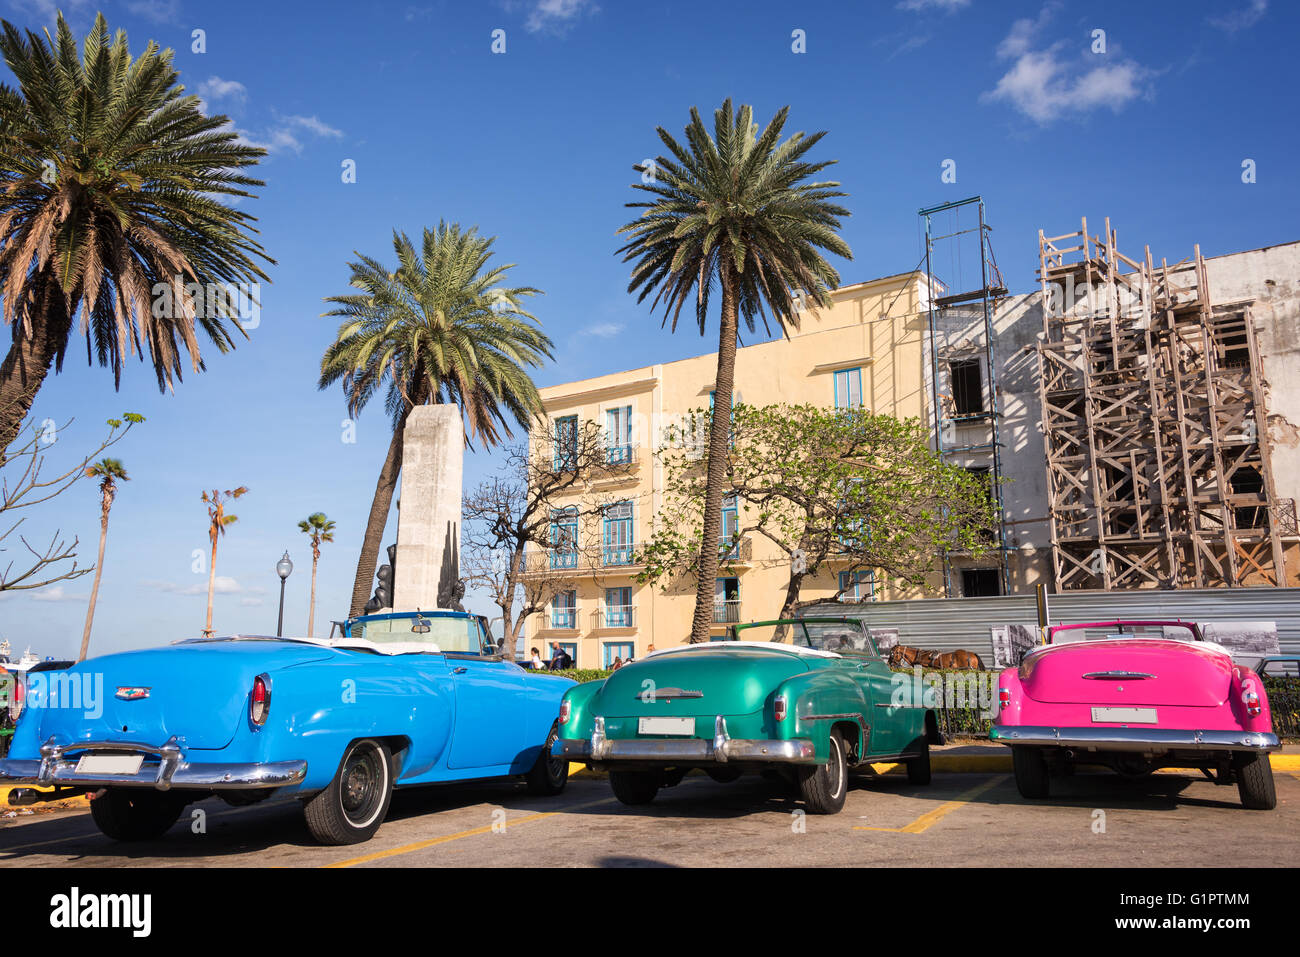 Vintage american cars parked in Old Havana, Cuba Stock Photo